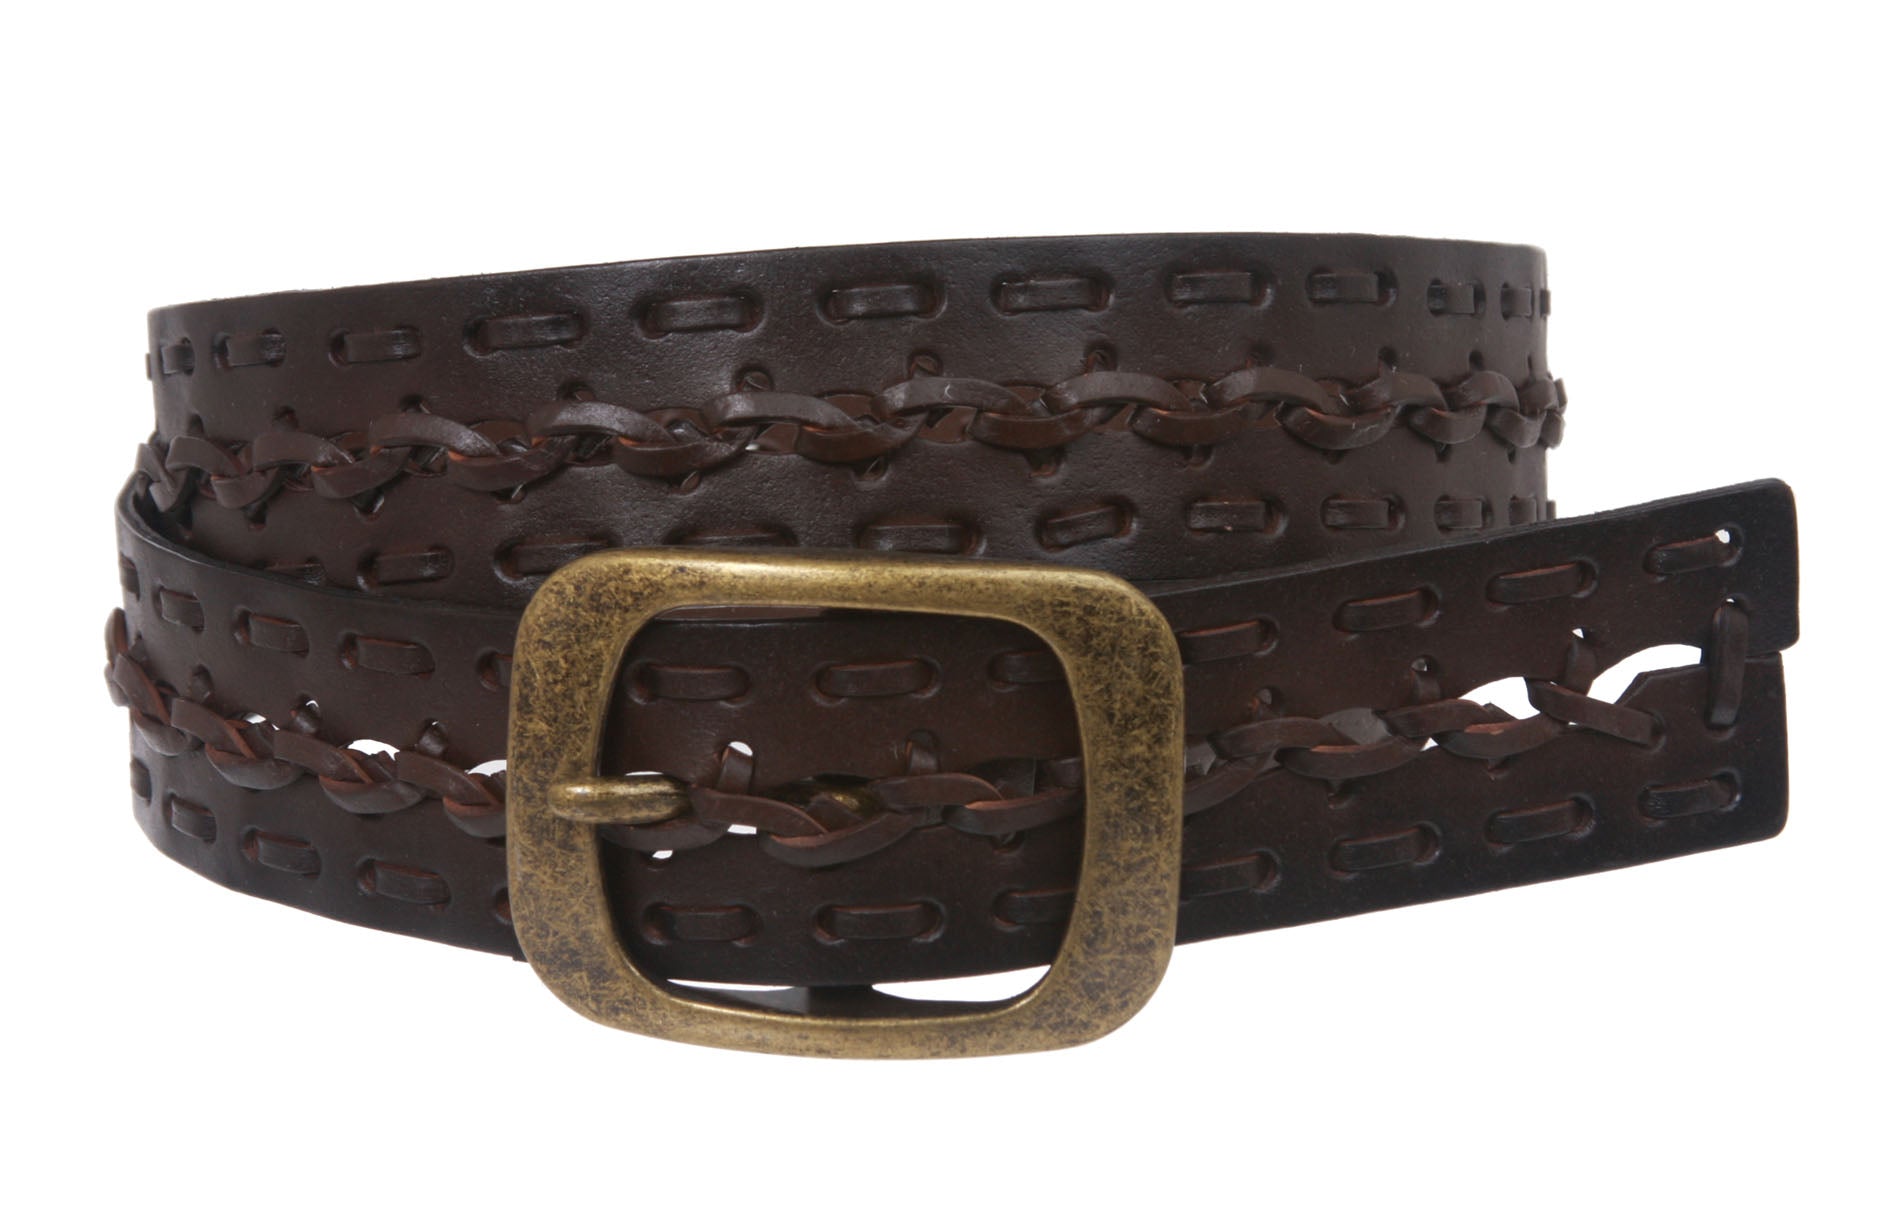 Women's 1 1/2"  Braided Woven Non Leather Belt